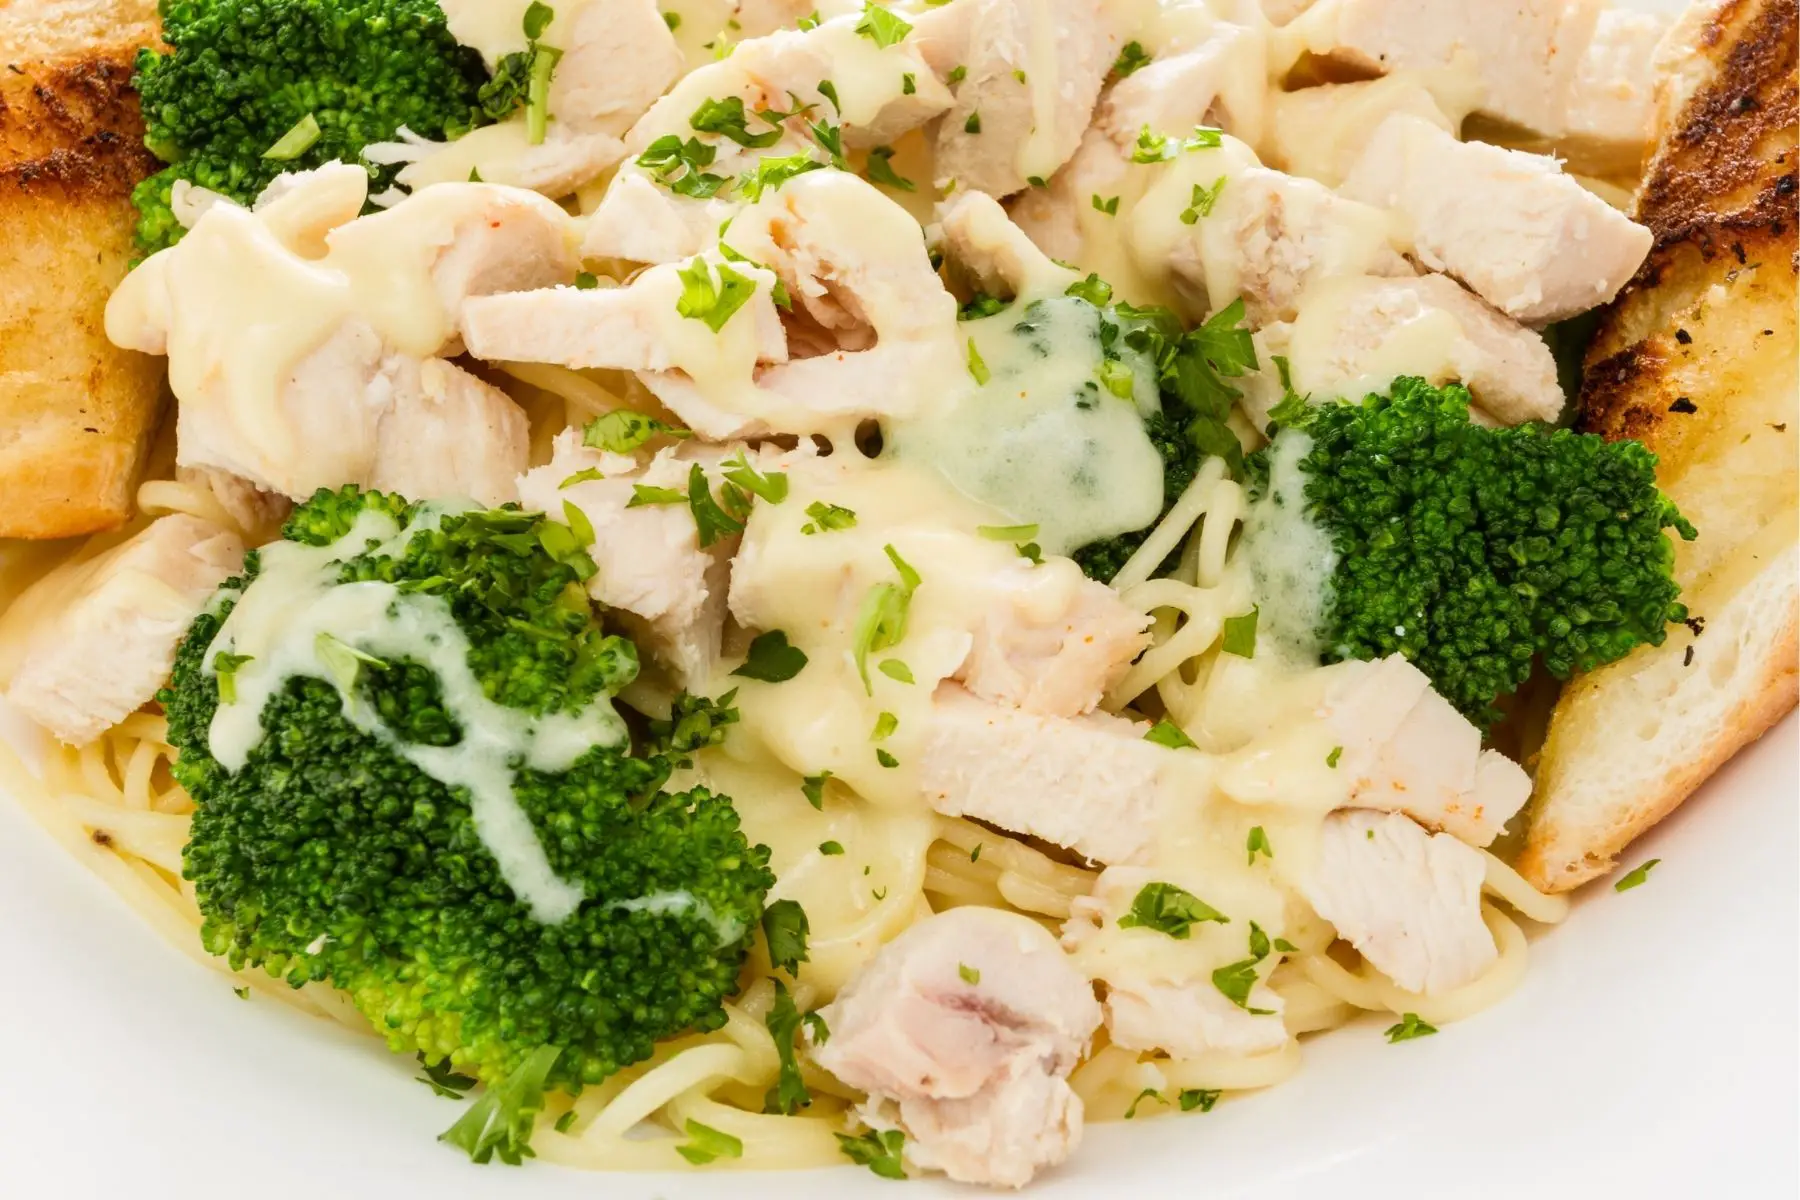 Chicken and Broccoli With Béchamel Sauce